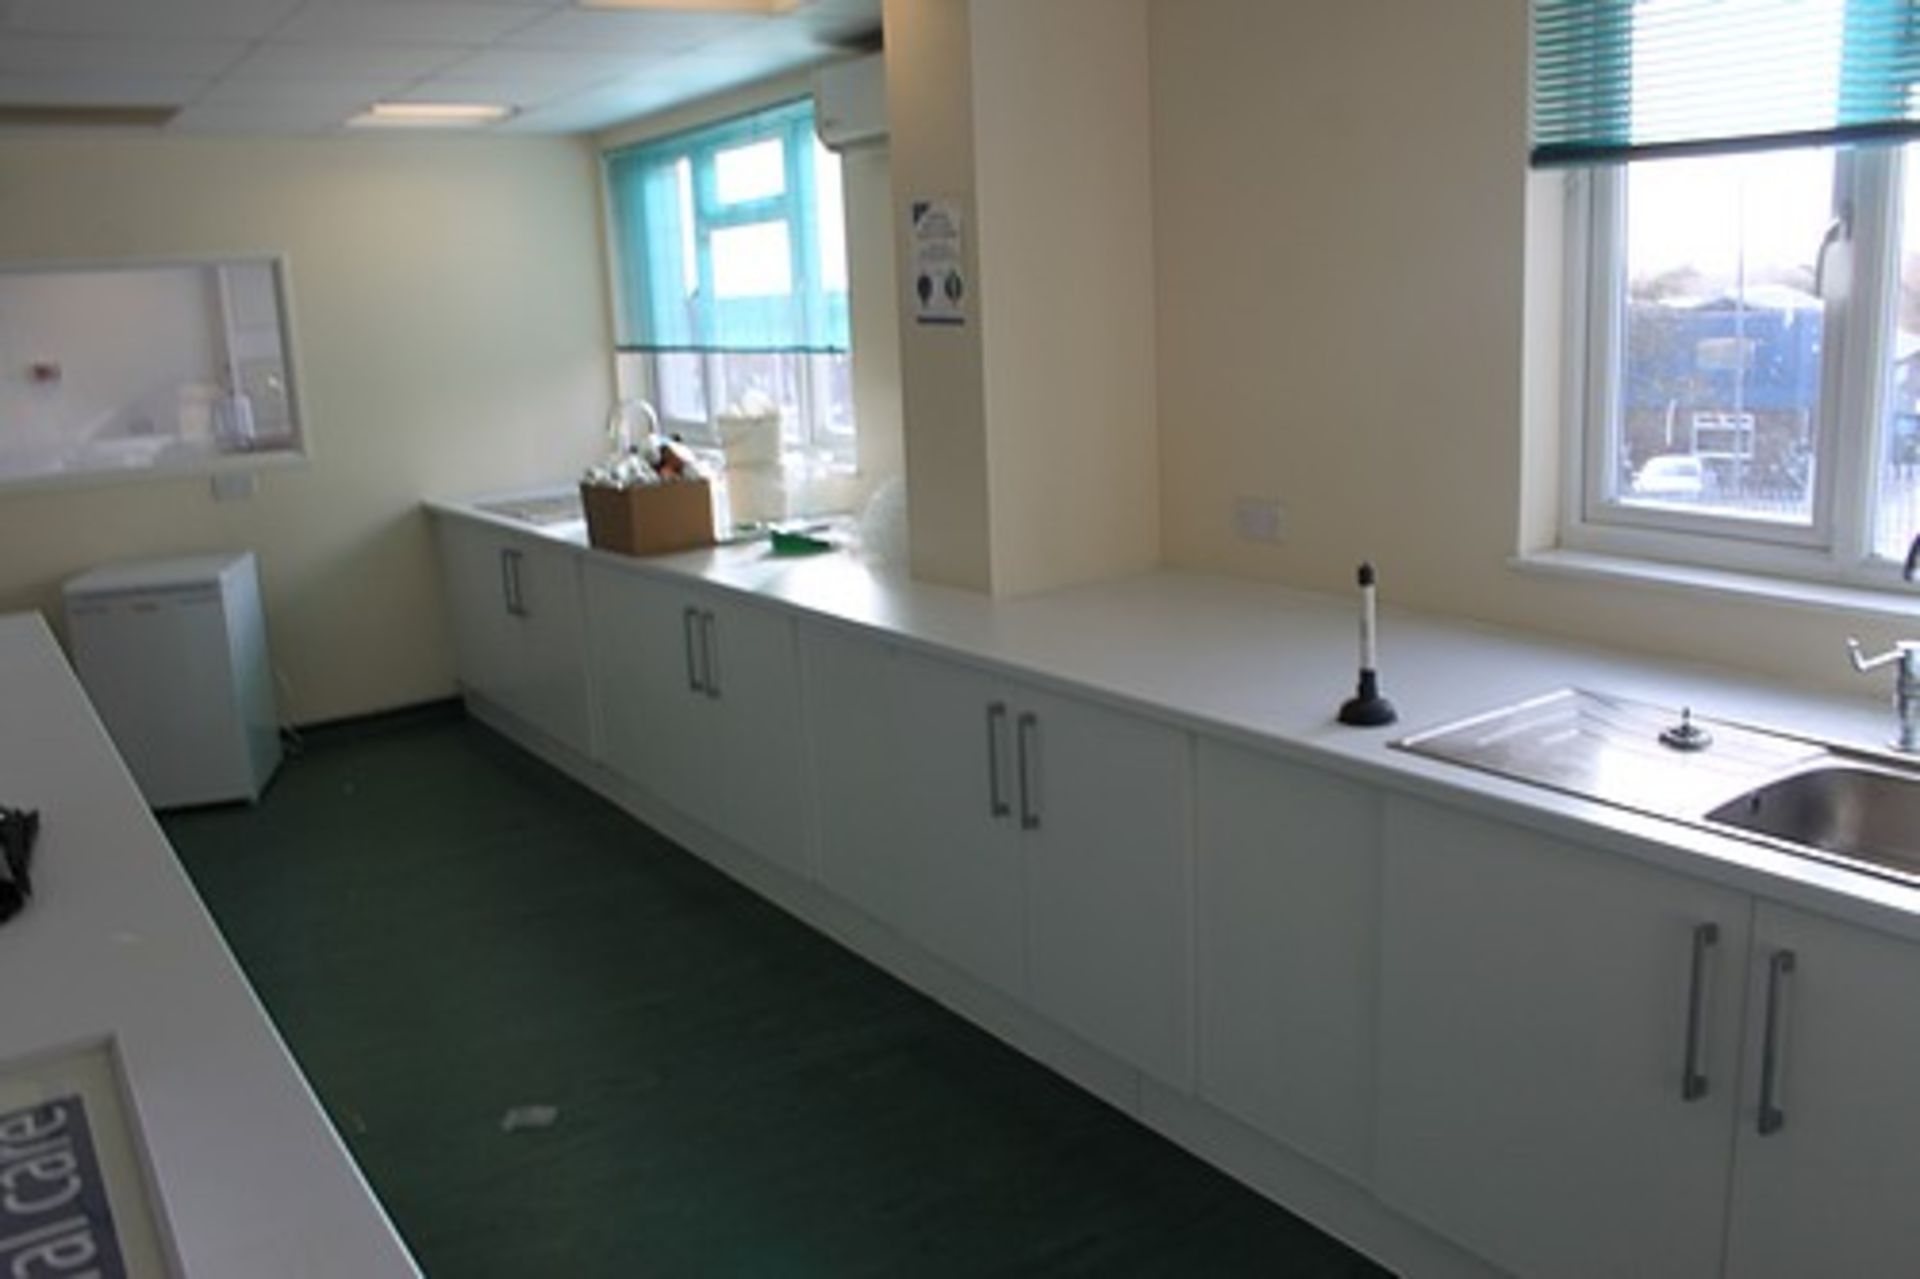 Complete Laboratory cabinets and under bench units white waterproof melamine resin coated faces - Image 4 of 5